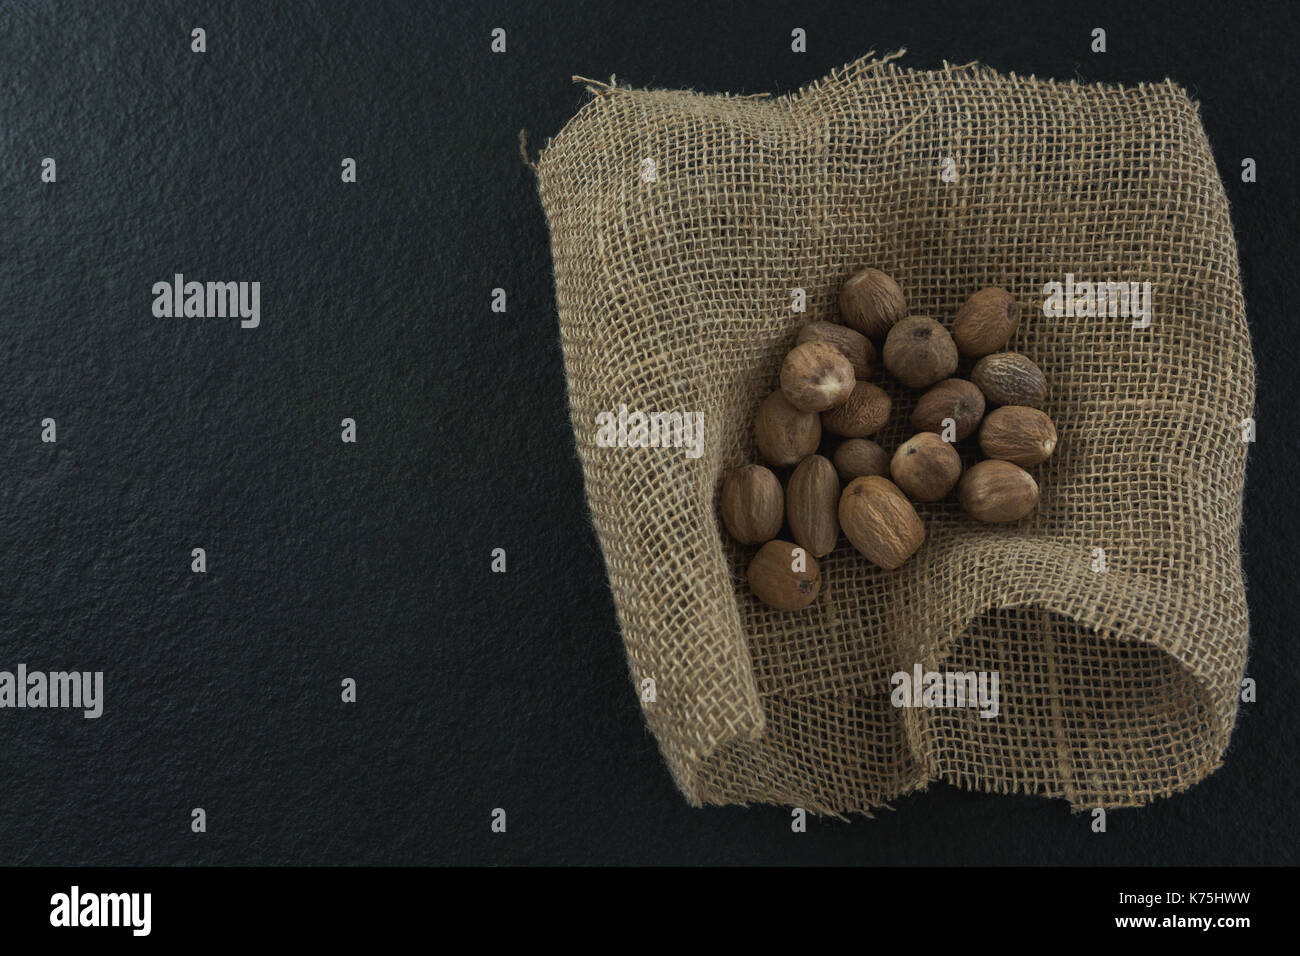 Close-up of nutmegs in sack on black background Stock Photo